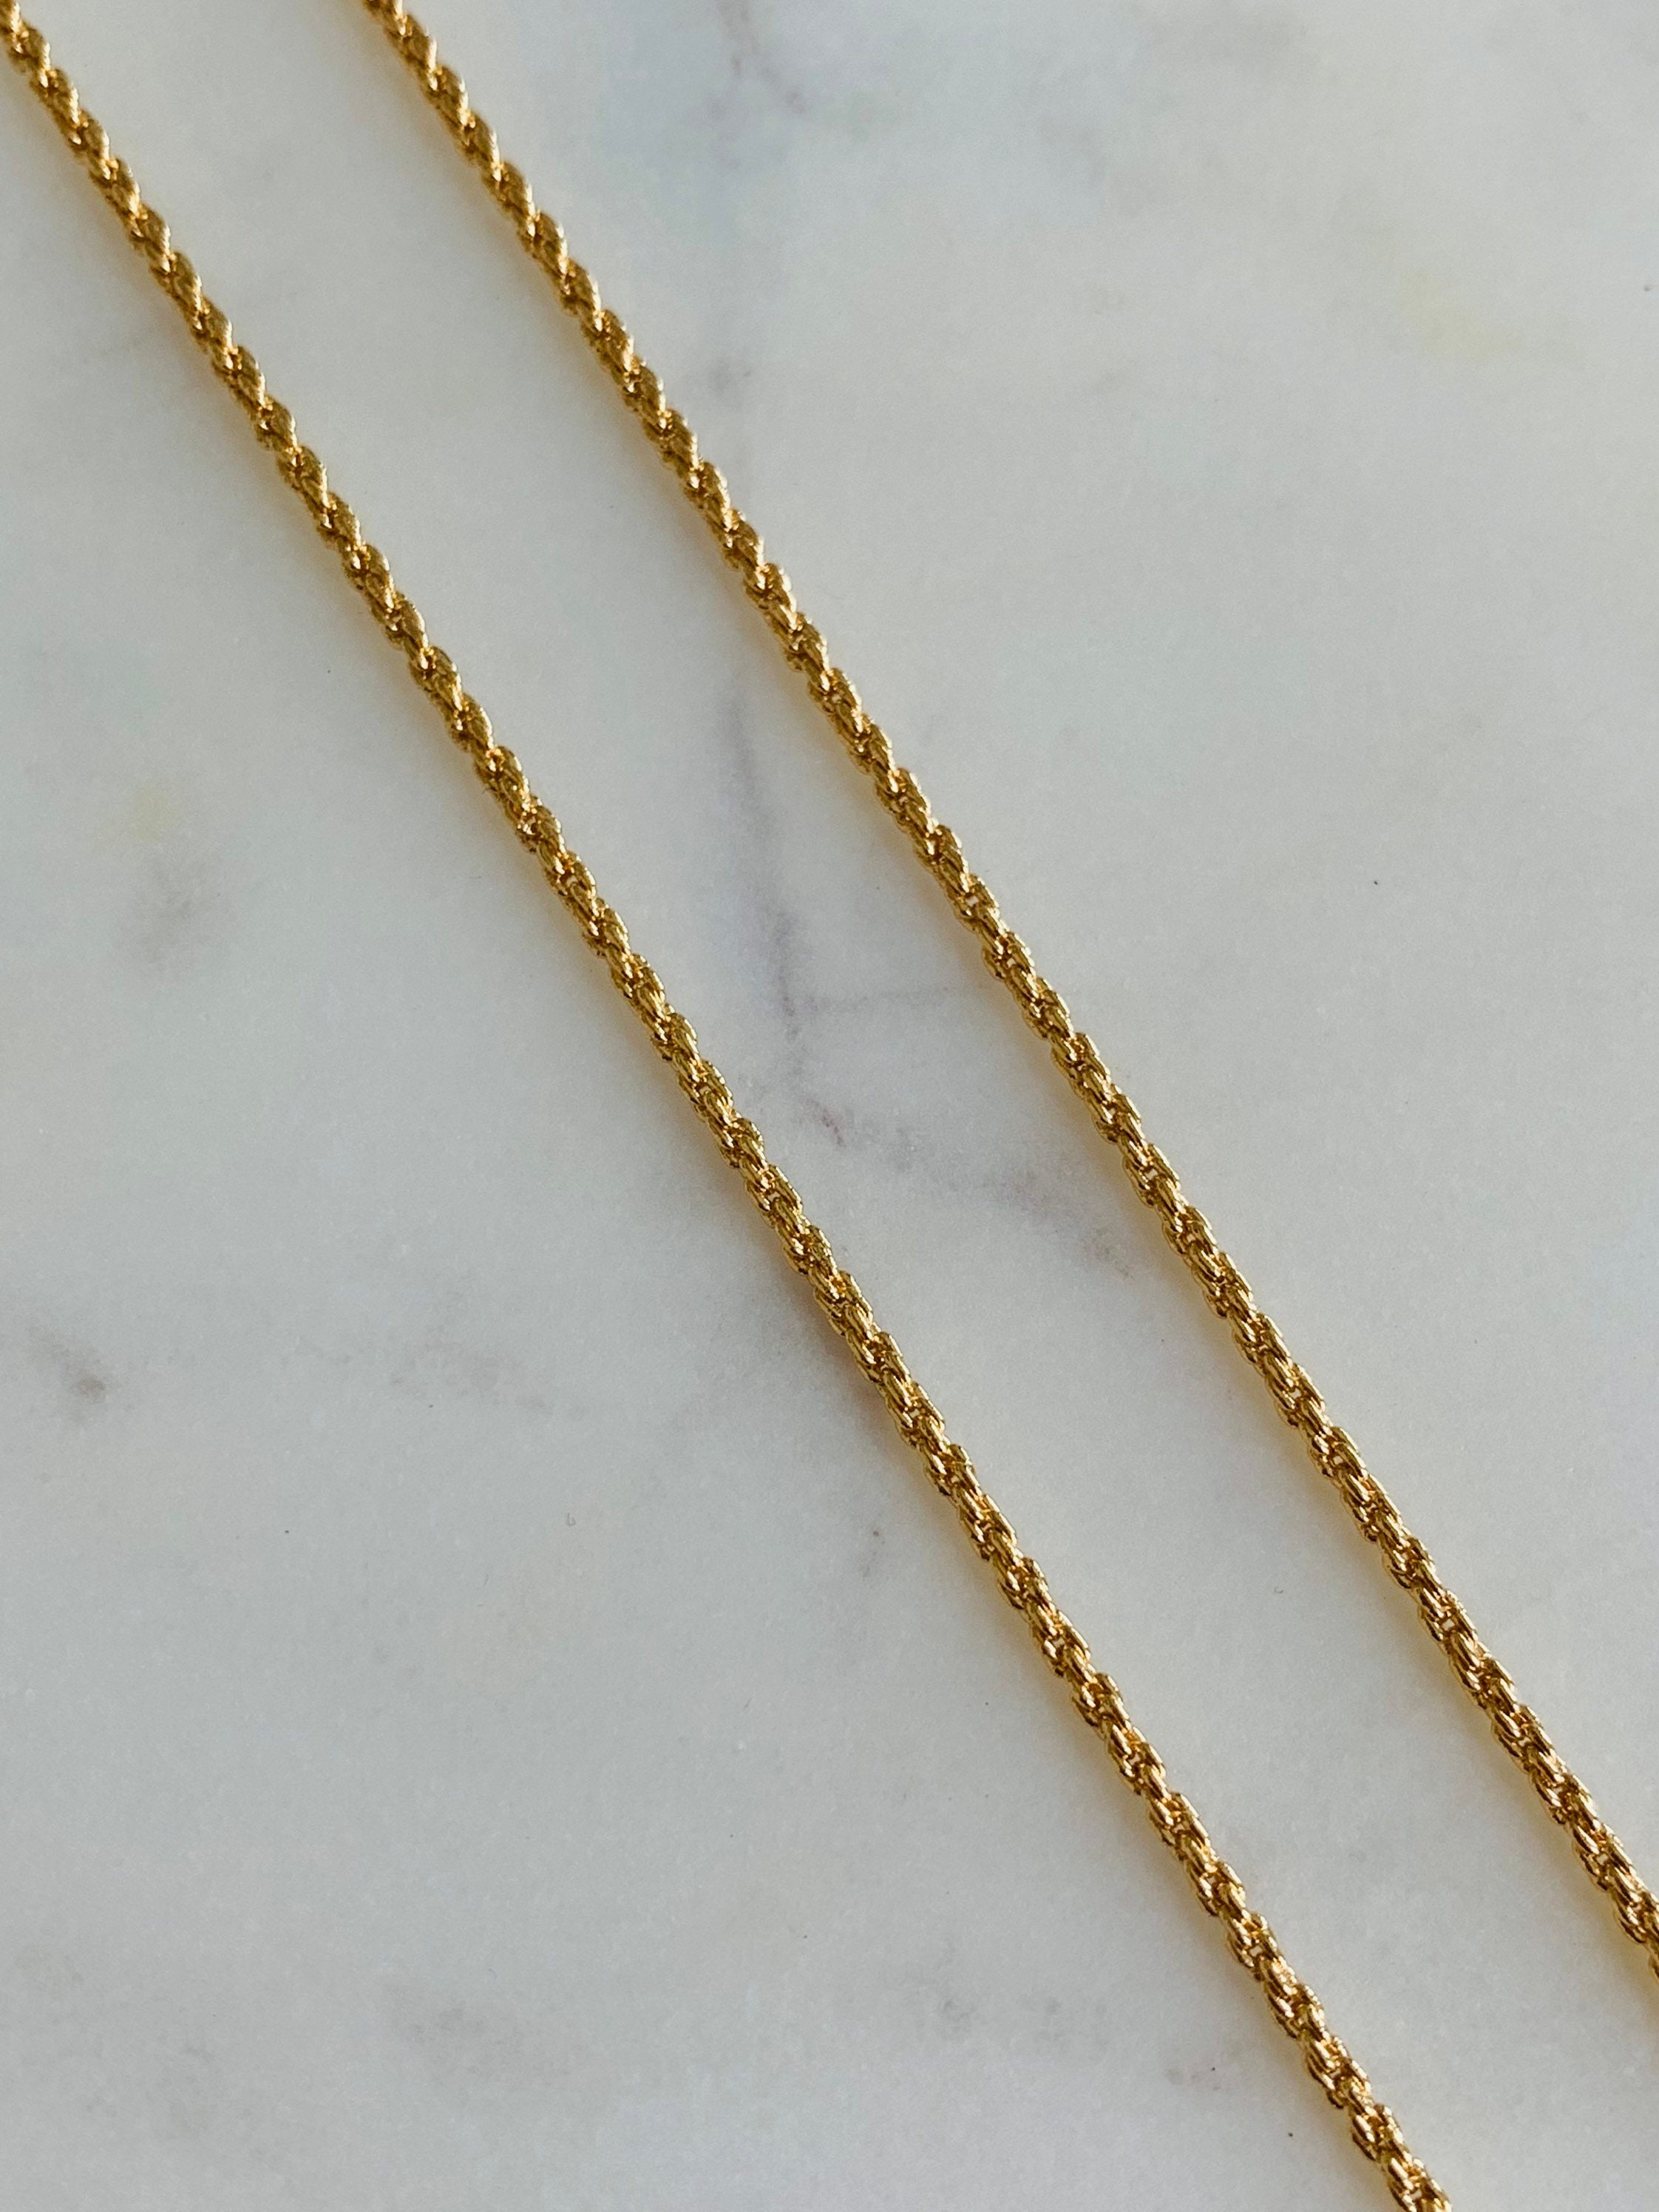 Rope Necklace, Rope Chain, Men's Chain, Gold Filled Necklace, Mens